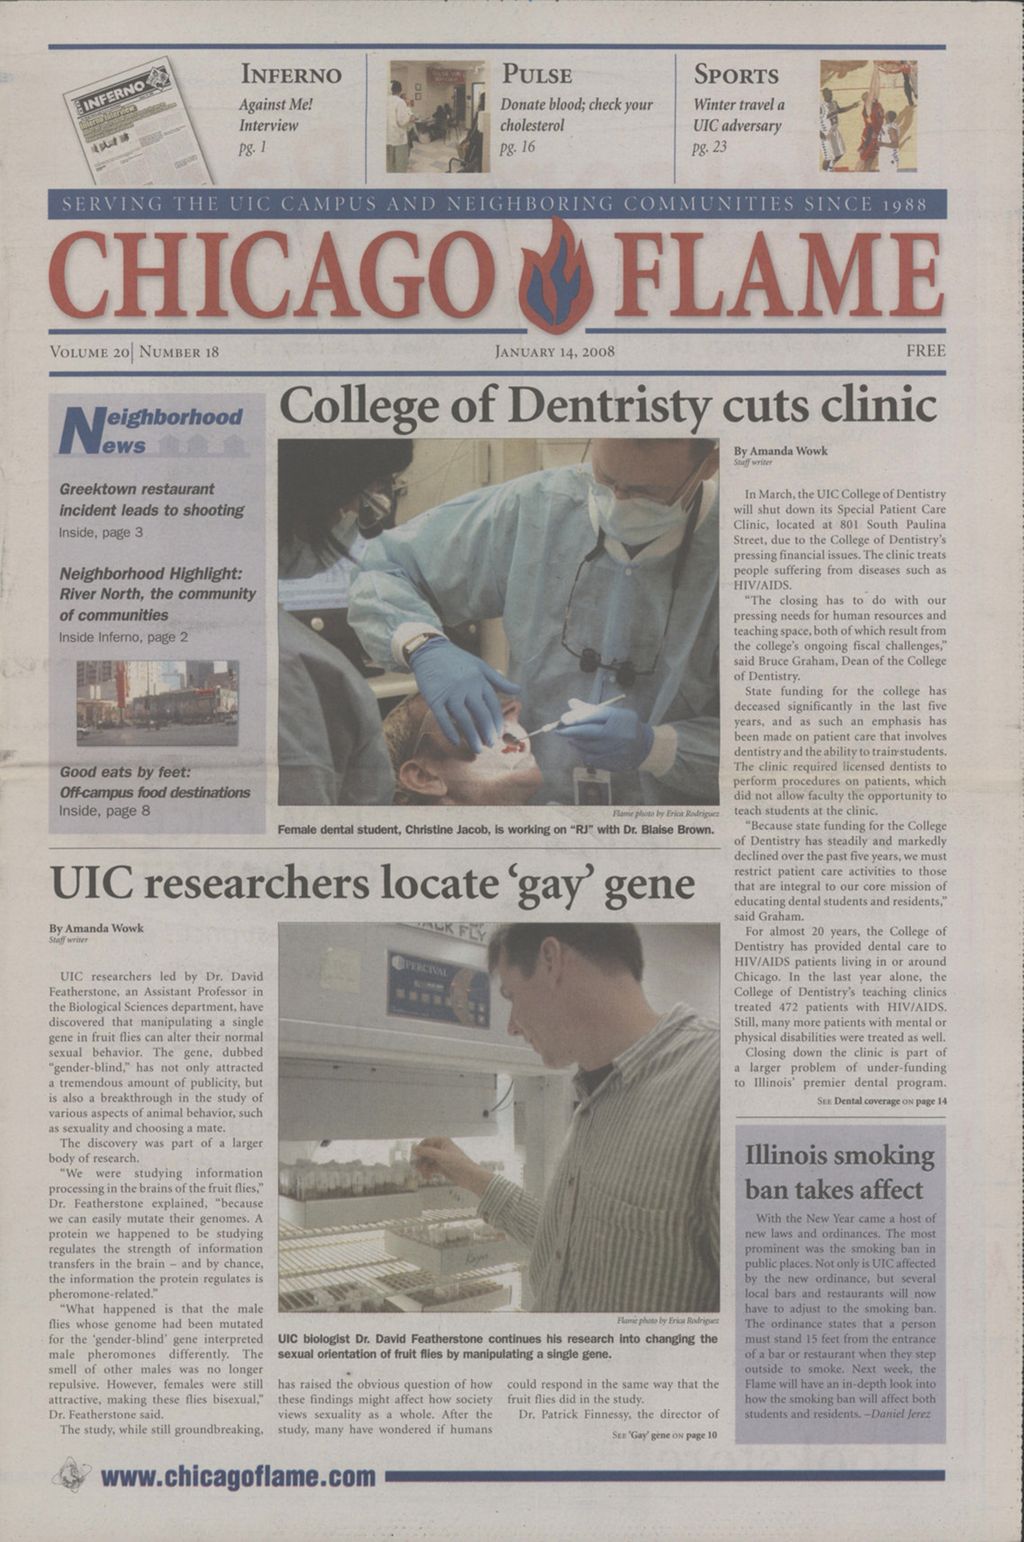 Chicago Flame (January 14, 2008)